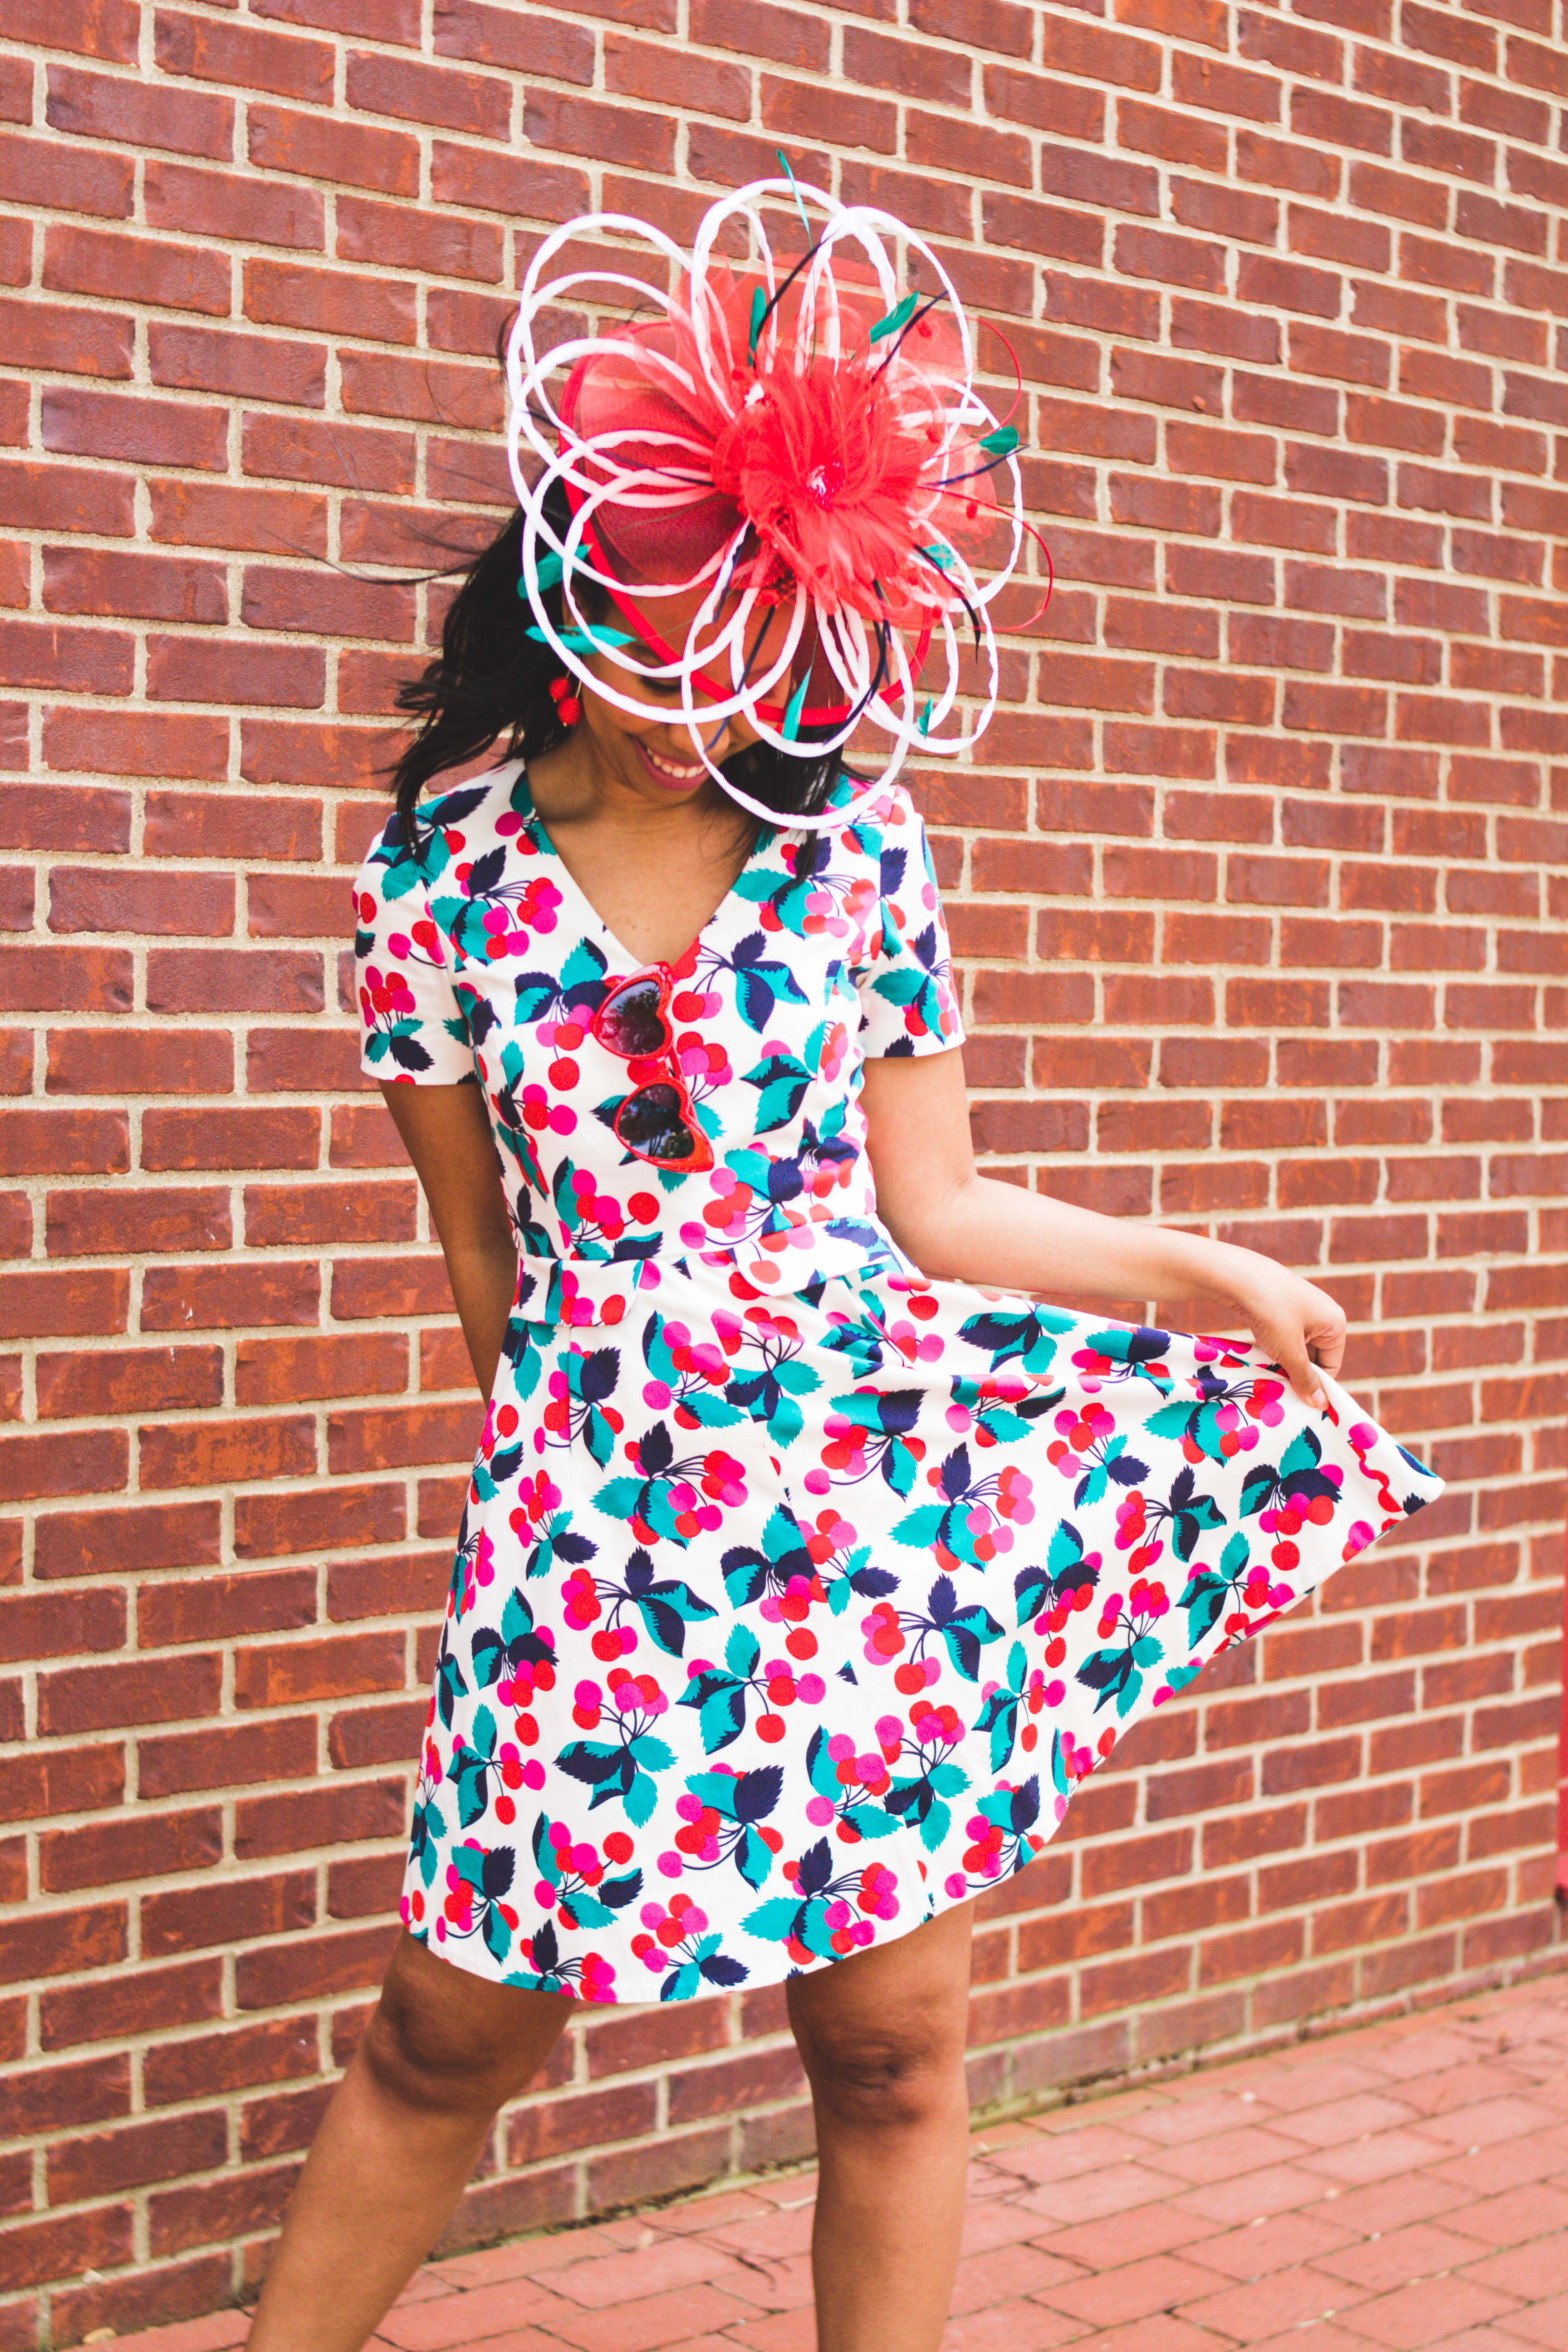 How to Affordably Dress for KY Derby + Target Giveaway